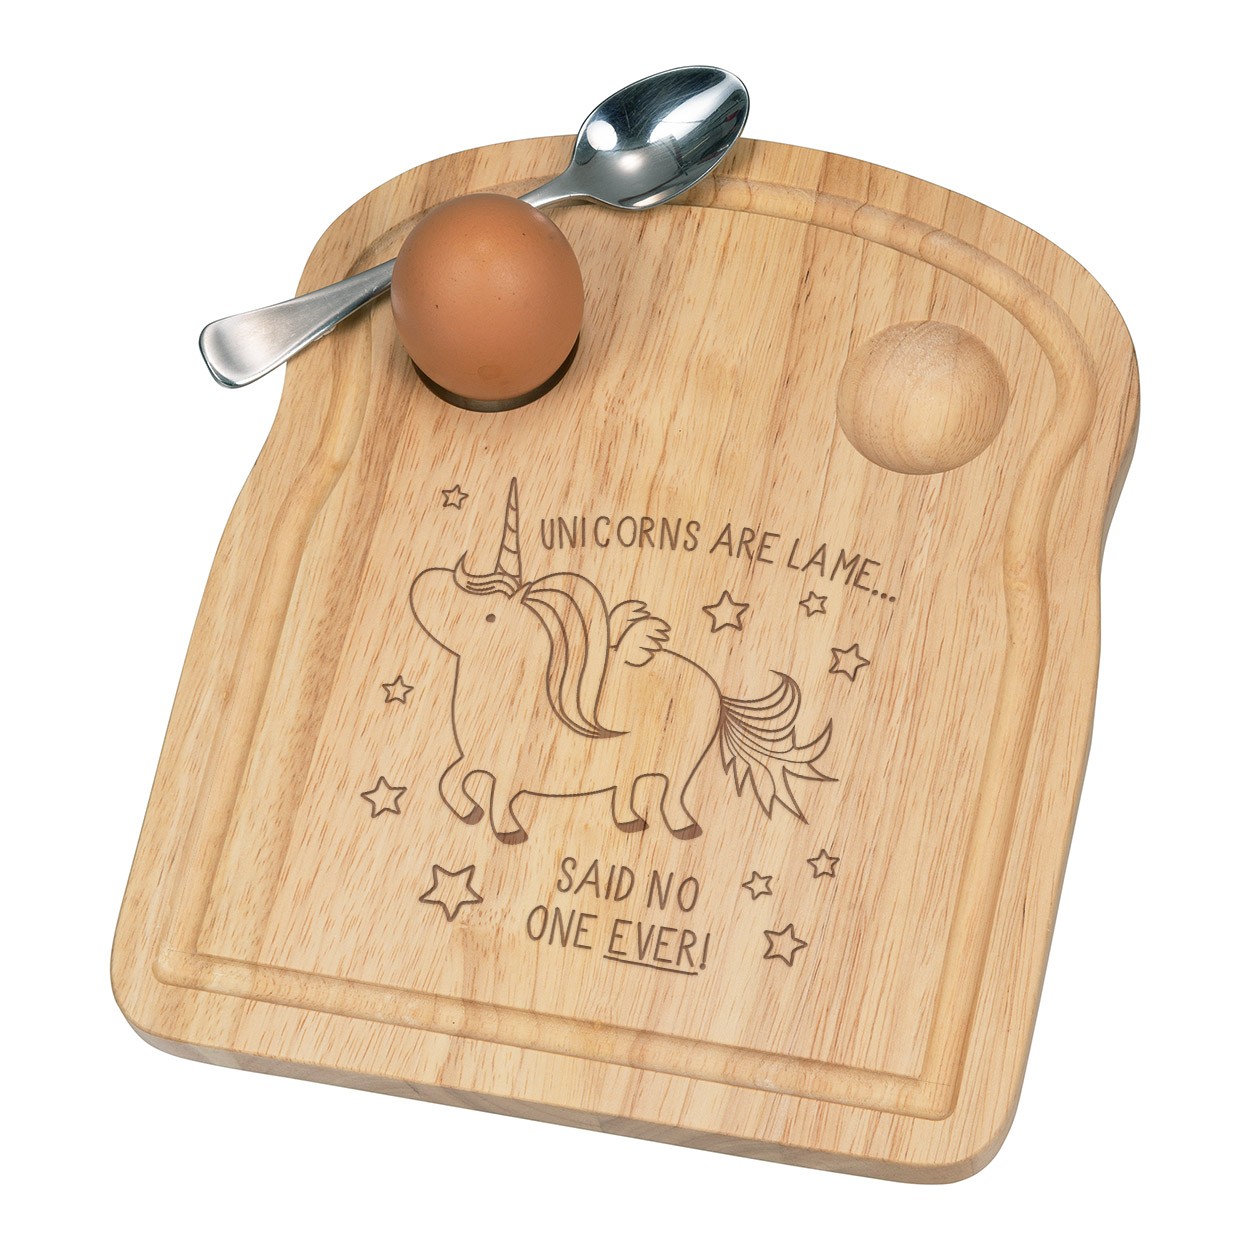 Unicorns Are Lame Said No One Ever Breakfast Dippy Egg Cup Board Wooden